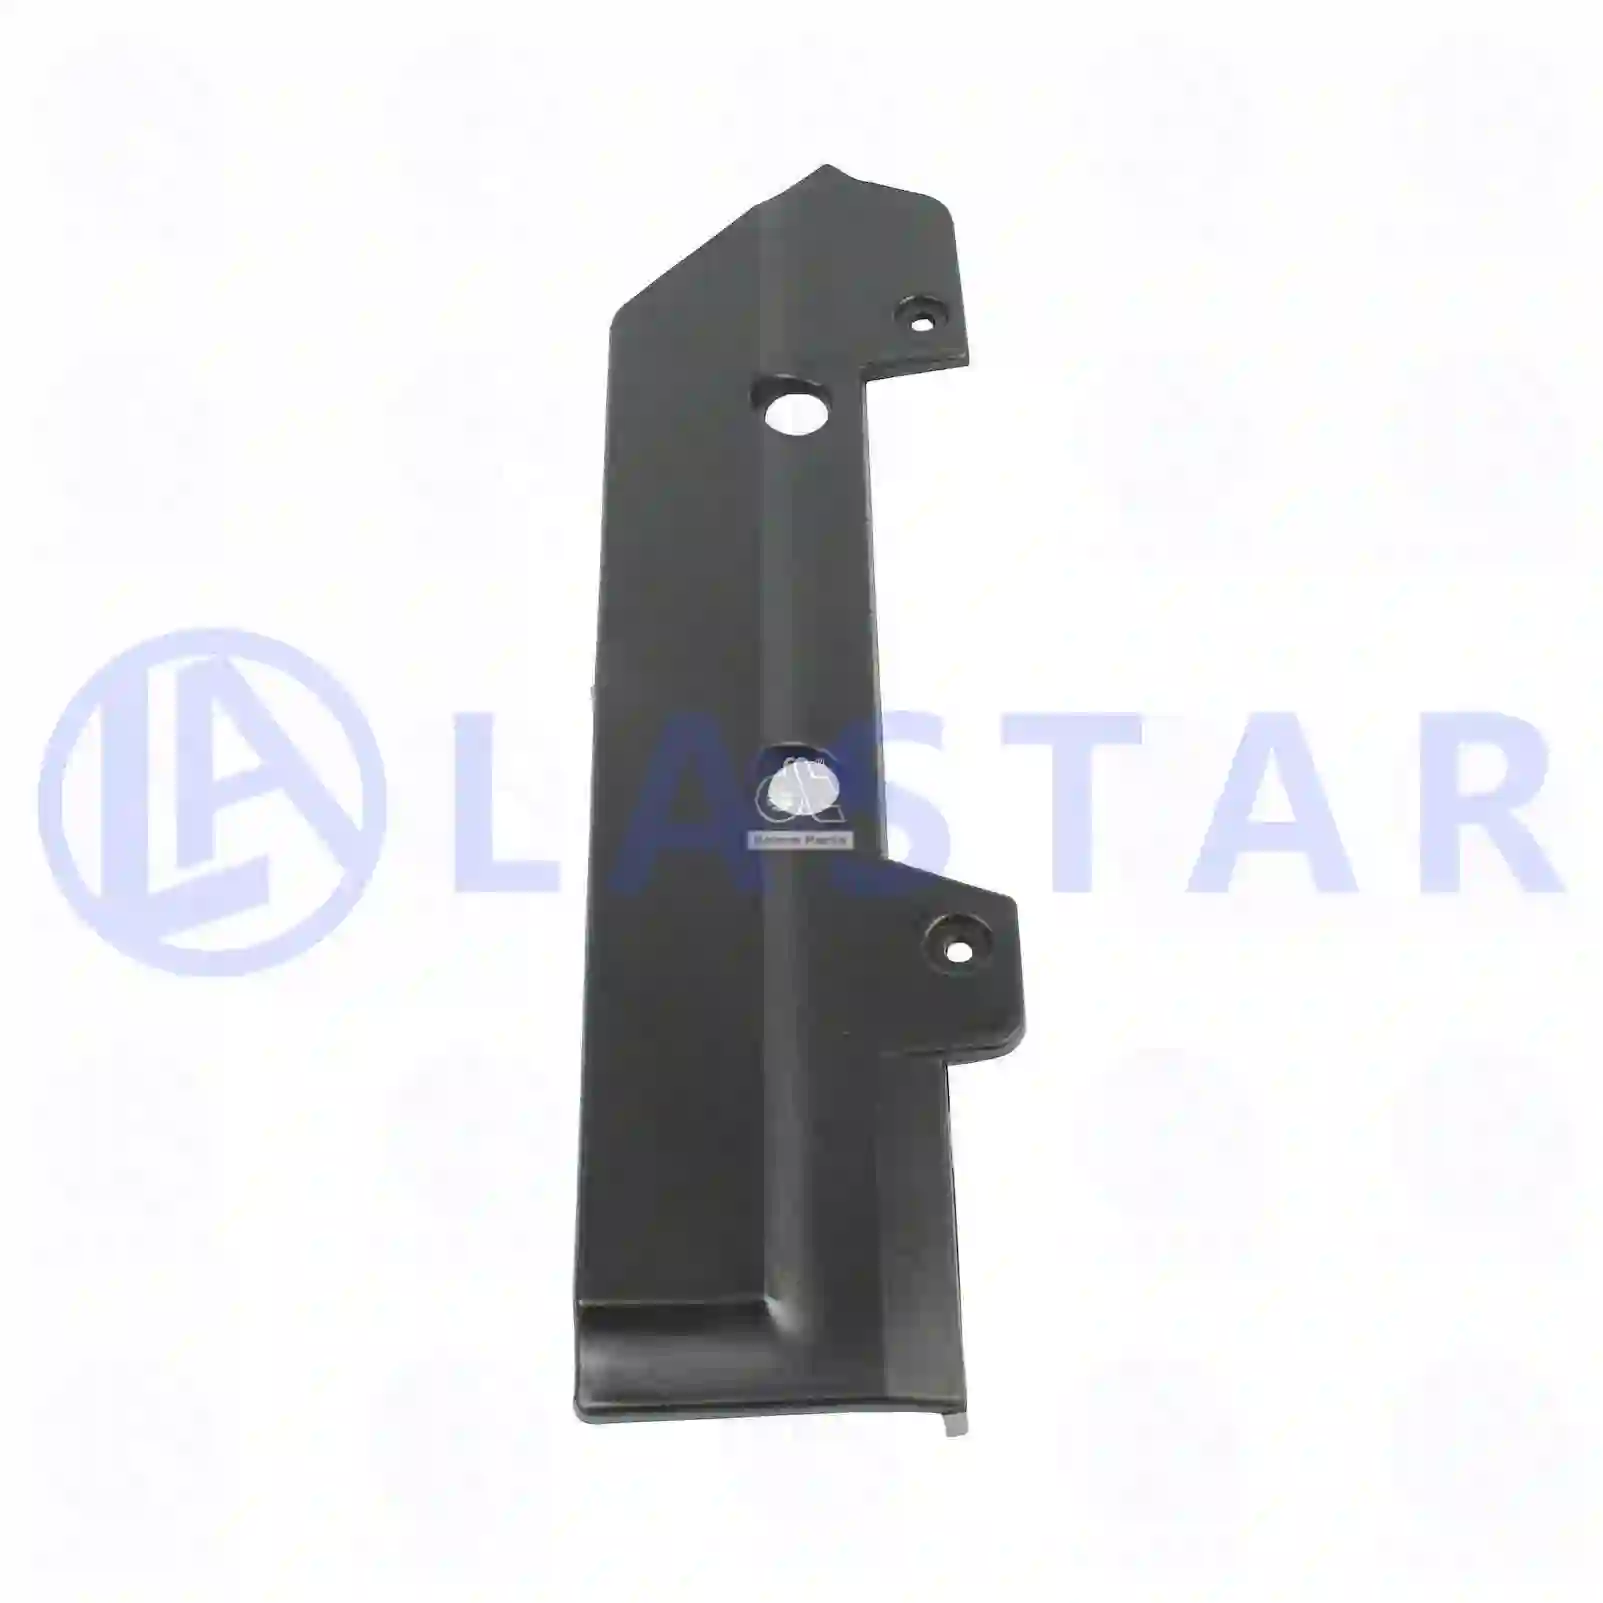 Cover, lamp housing, right, 77710145, 8141290, ZG20014-0008 ||  77710145 Lastar Spare Part | Truck Spare Parts, Auotomotive Spare Parts Cover, lamp housing, right, 77710145, 8141290, ZG20014-0008 ||  77710145 Lastar Spare Part | Truck Spare Parts, Auotomotive Spare Parts